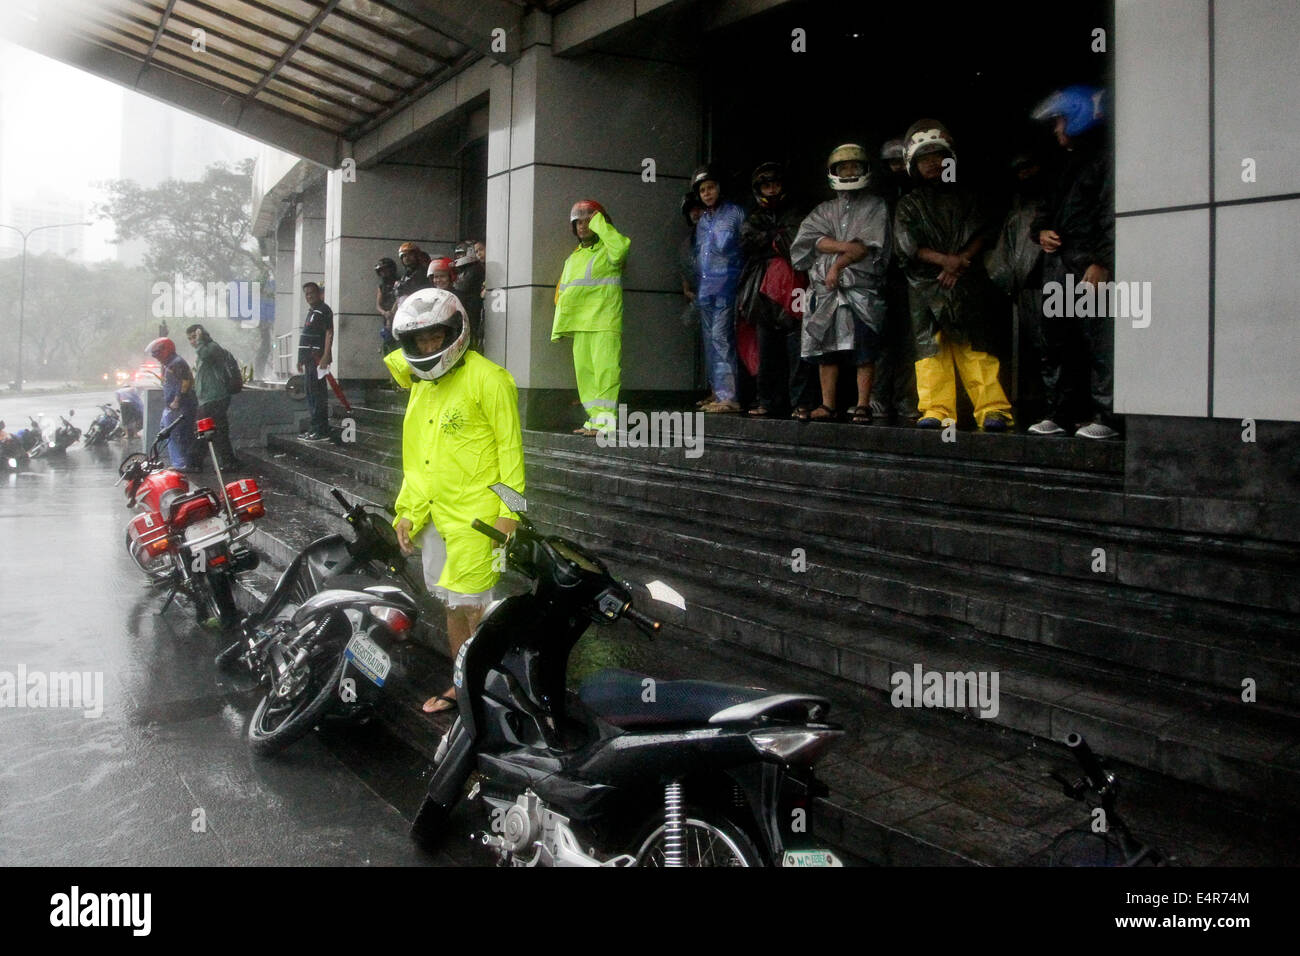 Manila, Philippines. 16th July, 2014. Motorcycle wait for the rain and wind to subside as Typhoon Rammasun hit Metro Manila. Typhoon Rammasun (locally known as Glenda) had maximum sustained winds of 150 kph and gustiness of up to 185 kph when it hit Metro Manila. Across the country, about 400,000 people had fled their homes and sheltered in evacuation centers, according to the disaster management council. © PACIFIC PRESS/Alamy Live News Stock Photo